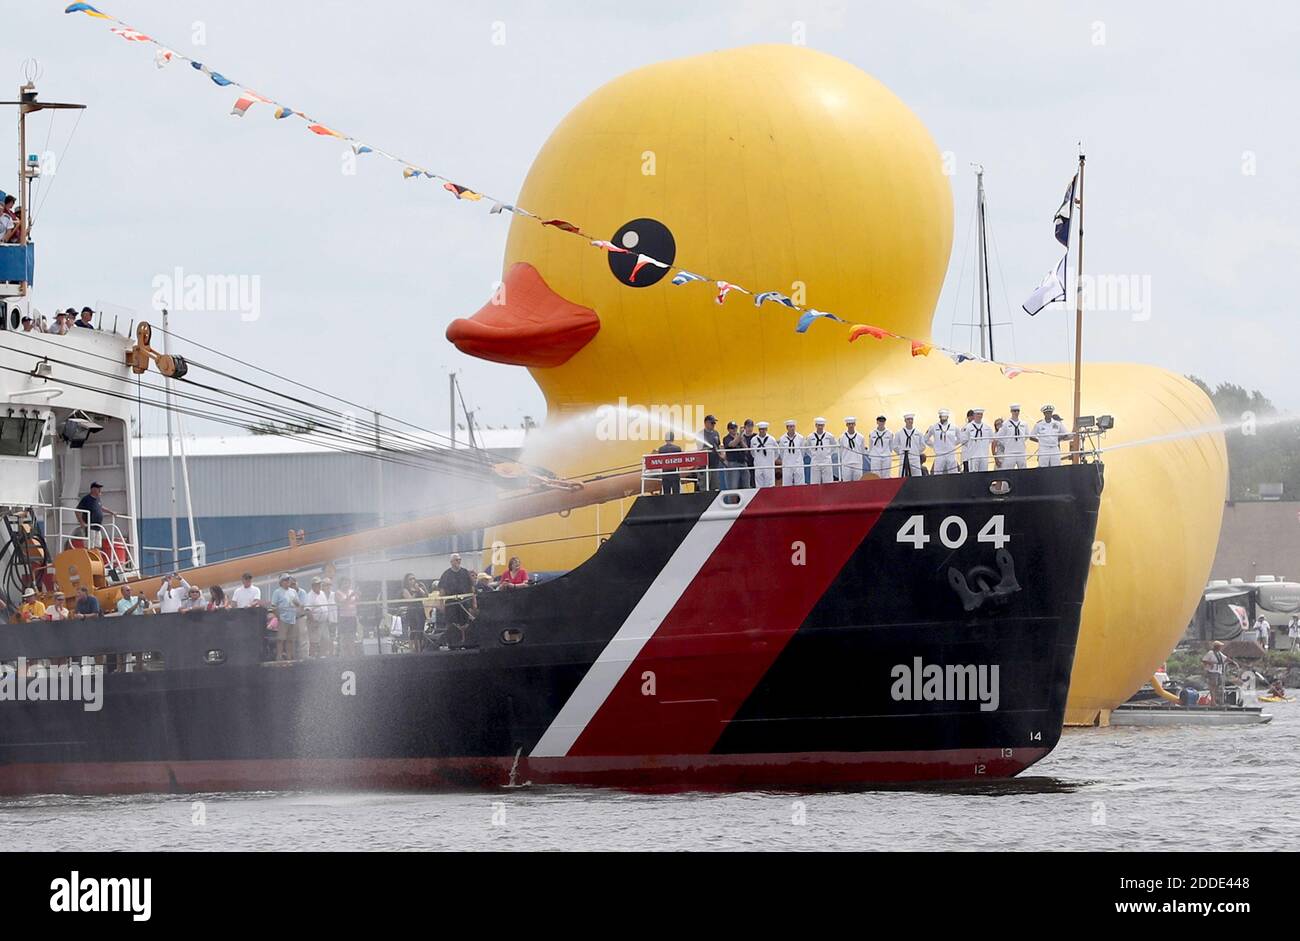 NO FILM, NO VIDEO, NO TV, NO DOCUMENTARY - Tall Ships Duluth 2016 was back in Duluth and featured the world's largest rubber duck at 61 feet tall, about the height of a six-story building, and weighing in at 11 tons, equaling roughly 3,000 real ducks, on Aug. 18, 2016 in Duluth, Minn. The rubber duck was seen being towed past the Sundew, a retired Coast Guard Cutter with water cannons firing. Photo by David Joles/Minneapolis Star Tribune/TNS/ABACAPRESS.COM Stock Photo